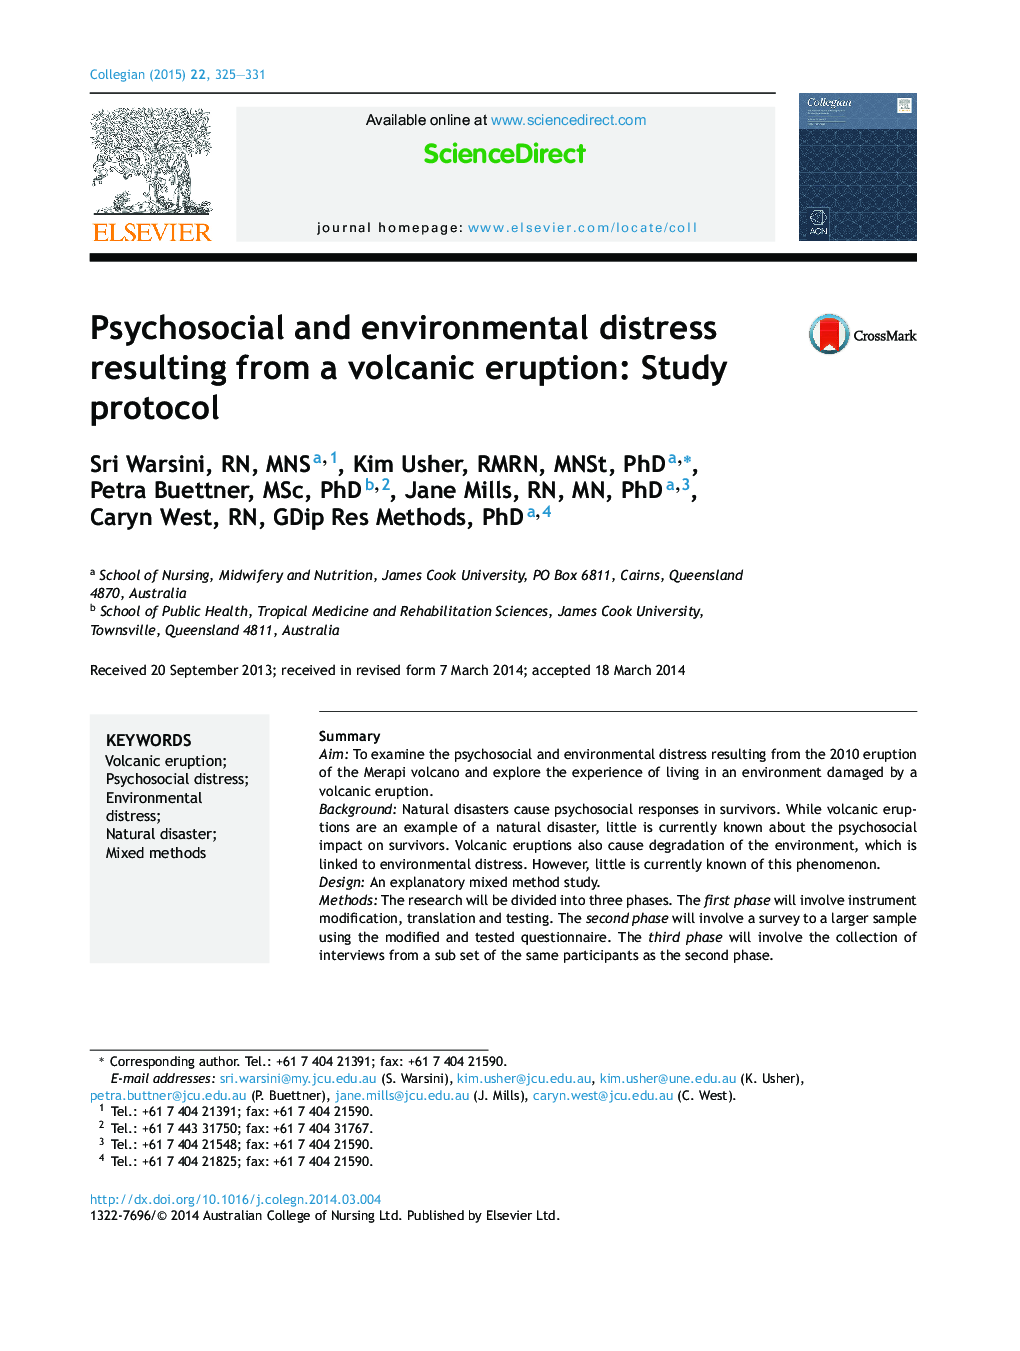 Psychosocial and environmental distress resulting from a volcanic eruption: Study protocol